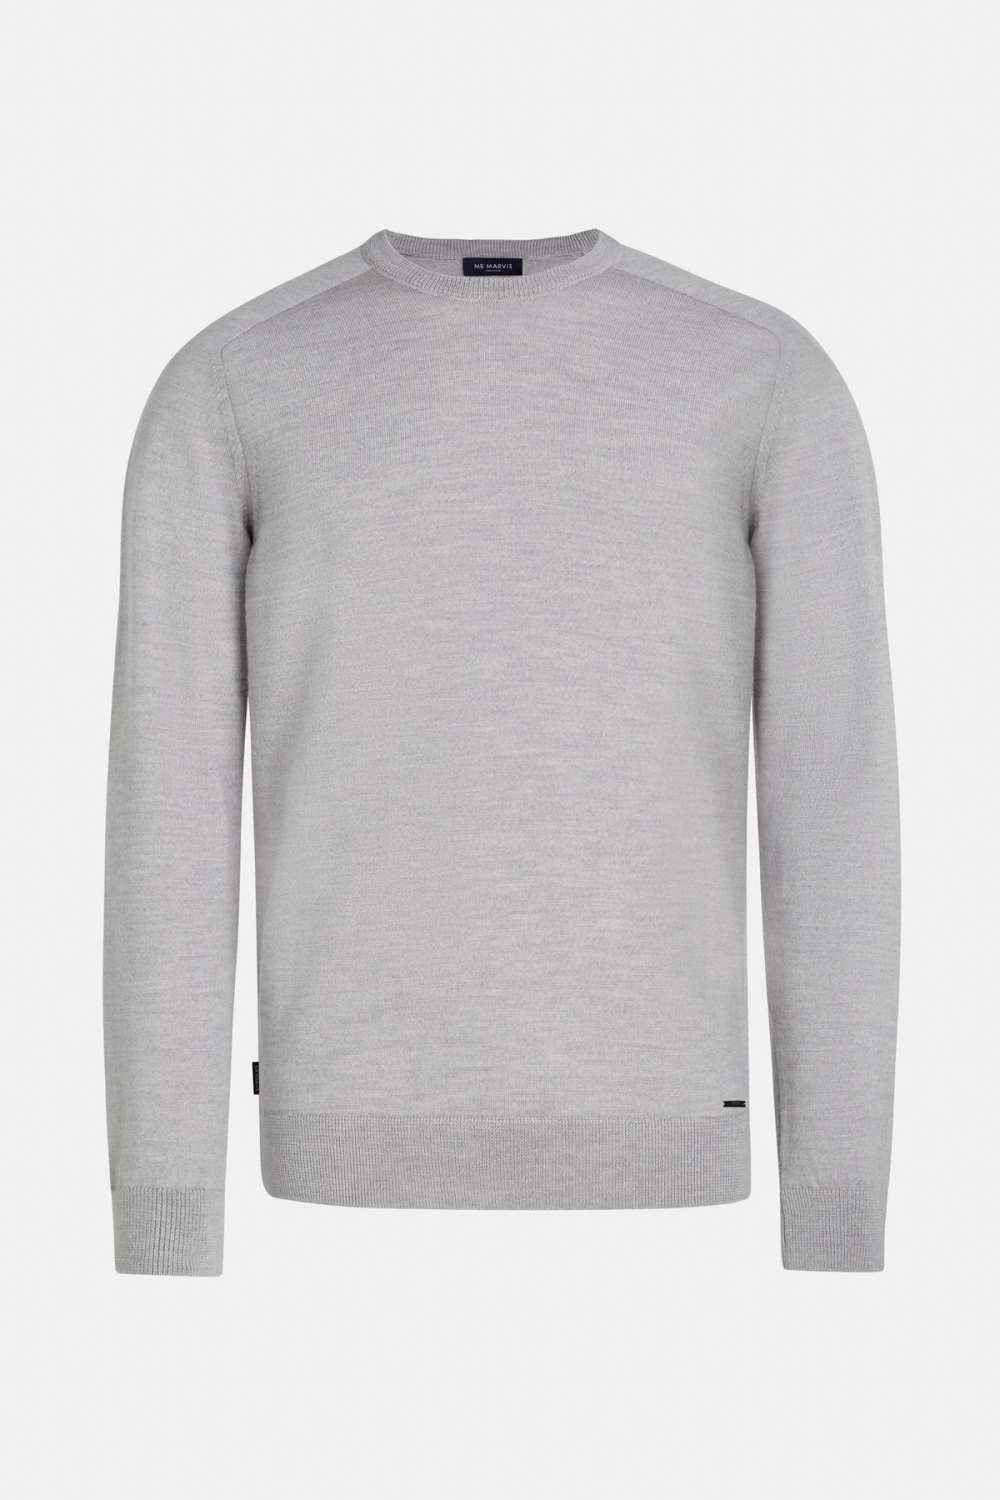 Oysters - The Merino Pullover